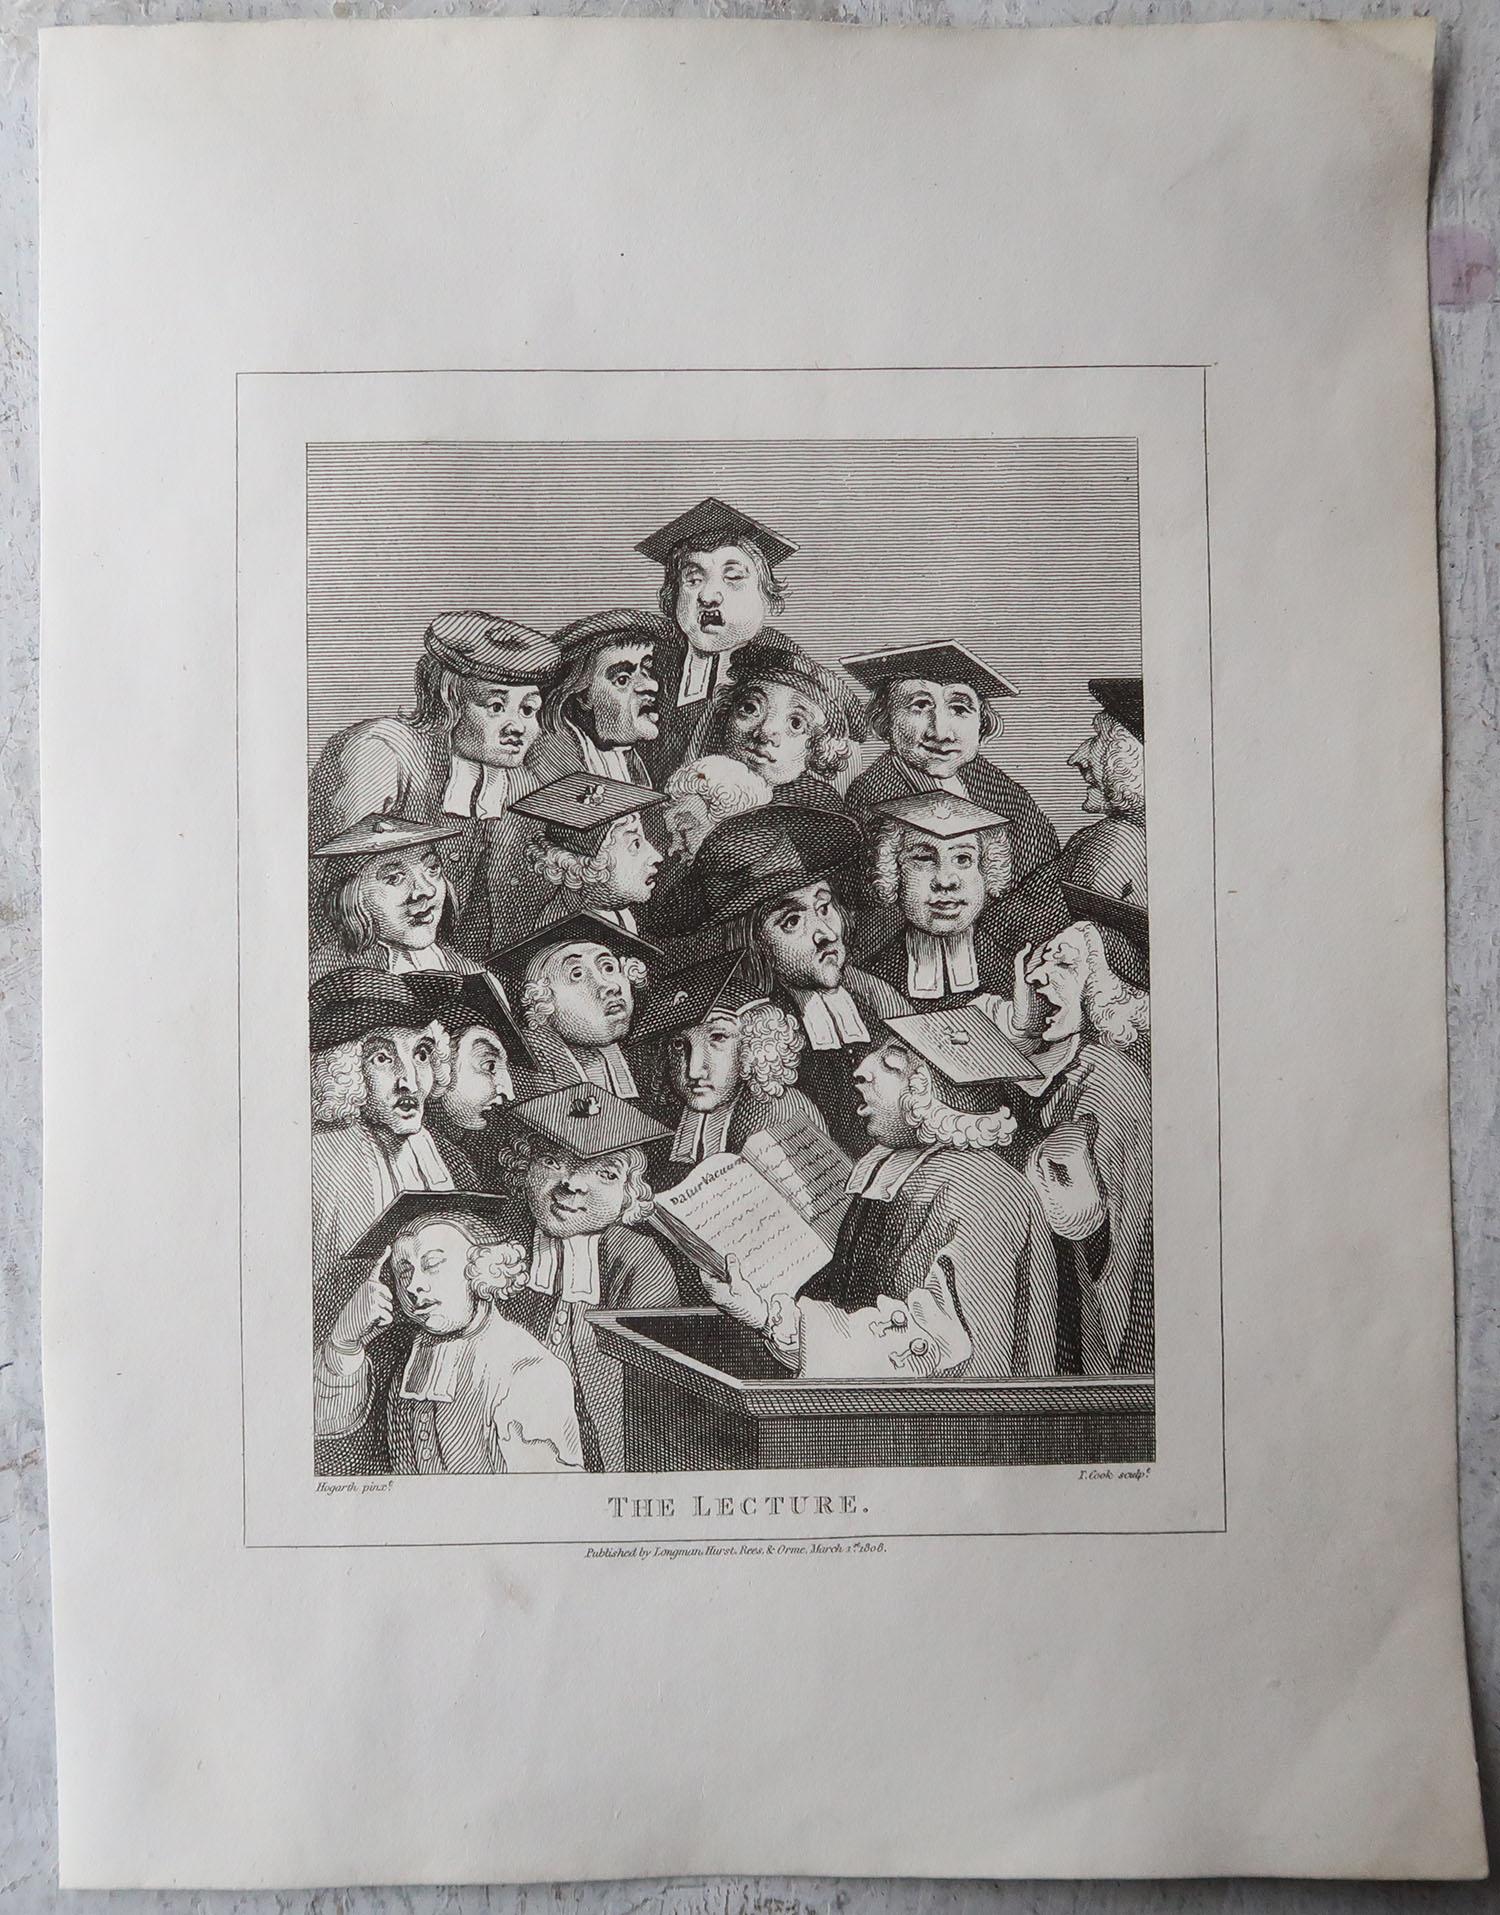 Set of 10 Original Antique Prints After Hogarth, Political, Satirical In Good Condition For Sale In St Annes, Lancashire